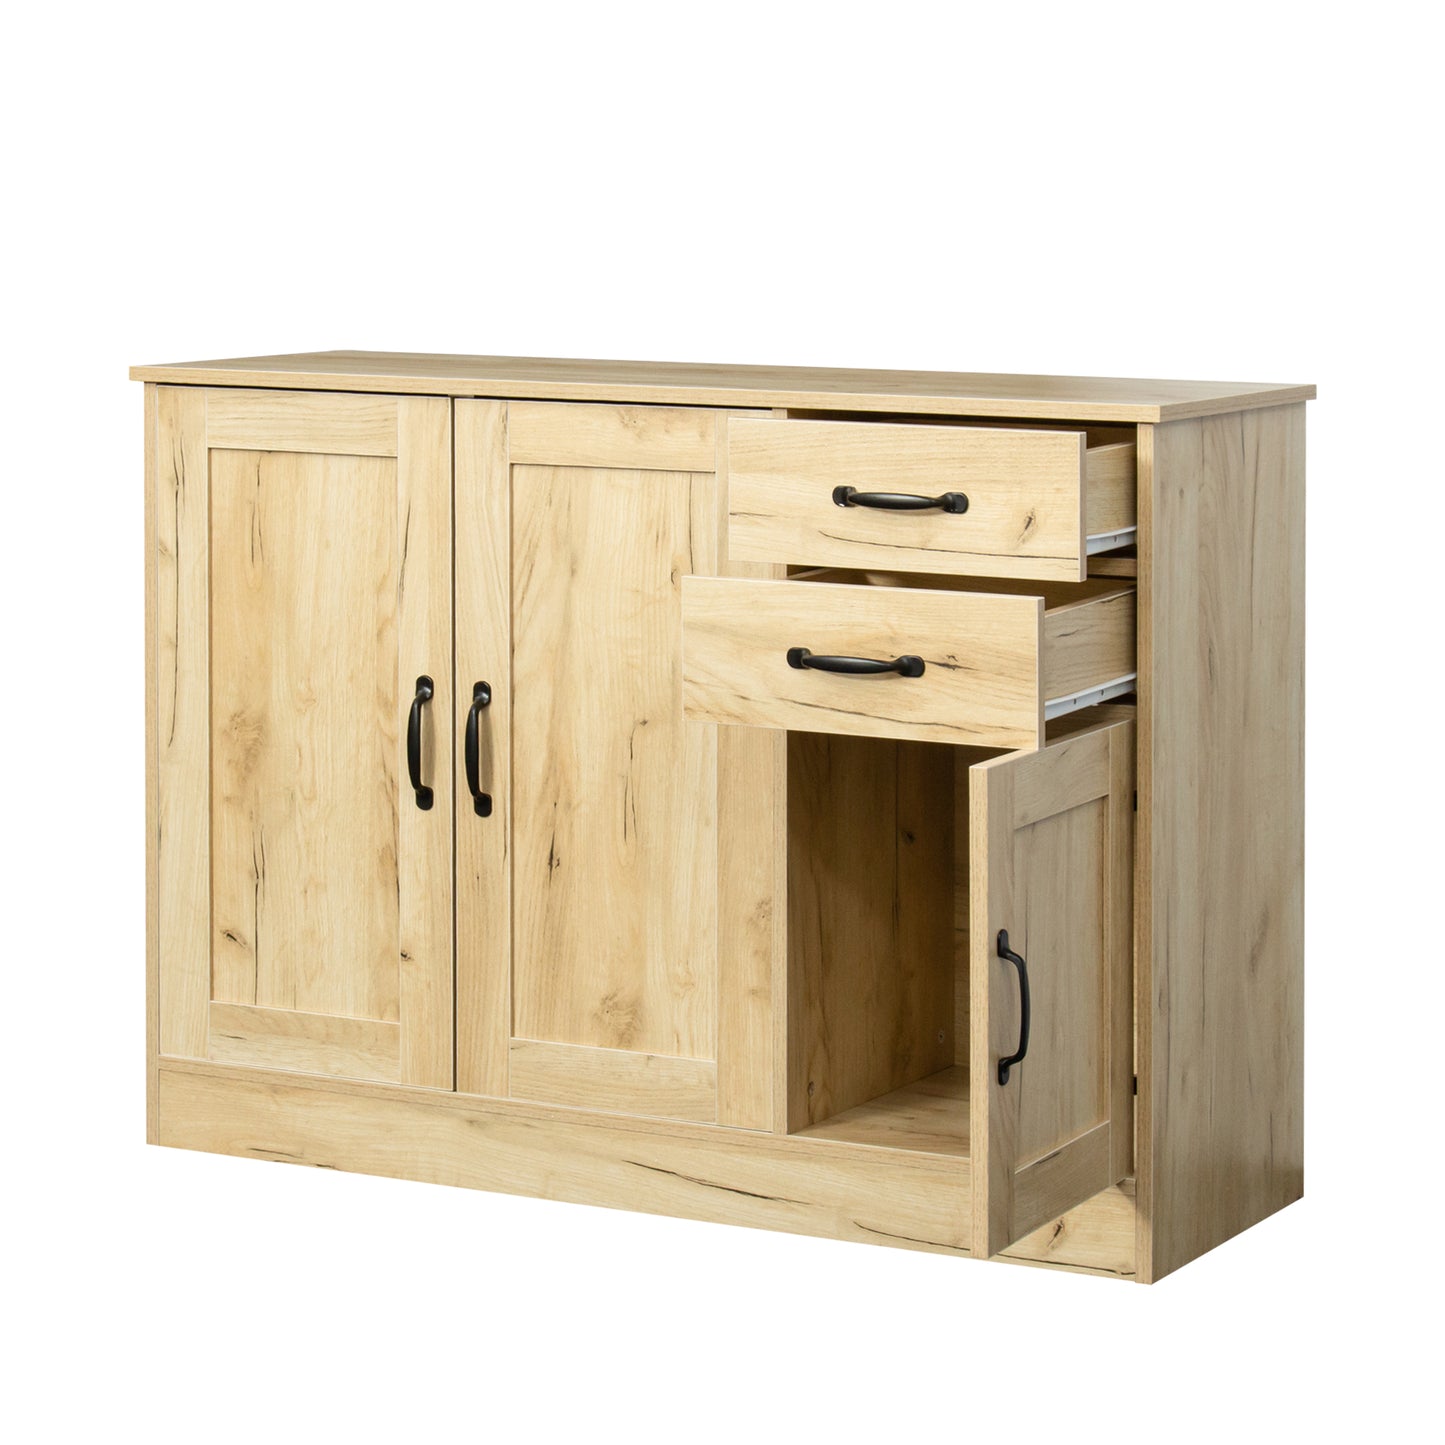 Sideboard Storage Cabinet, 43" Storage Cabinets with Doors and Shelves, Kitchen Buffet Sideboard for Dining Room Living Room Entryway, Oak, LJ4008